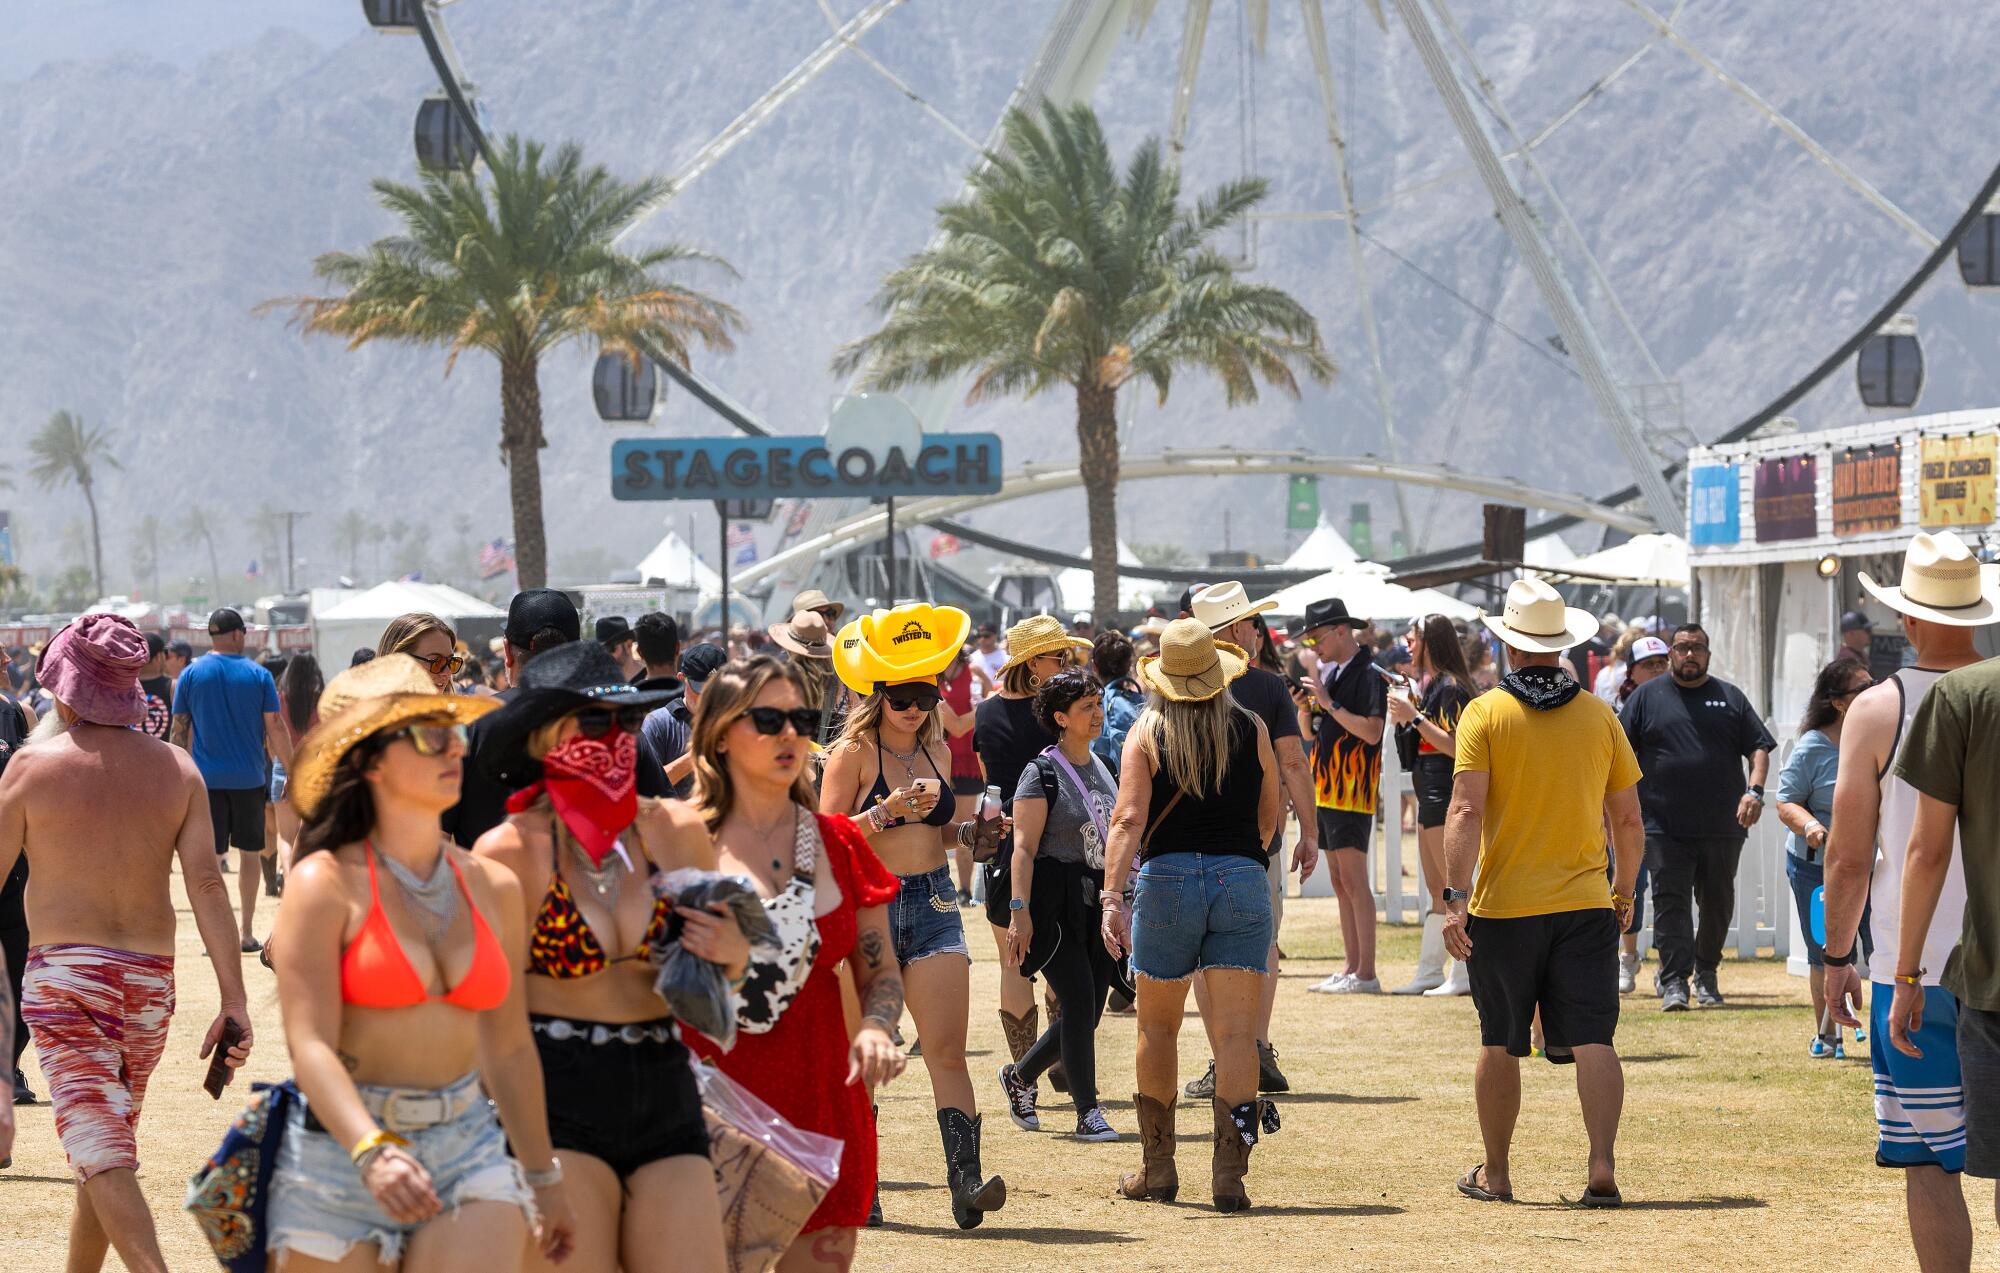 Thousands of country music fans arrive at Stagecoach and some make a dash for the best 